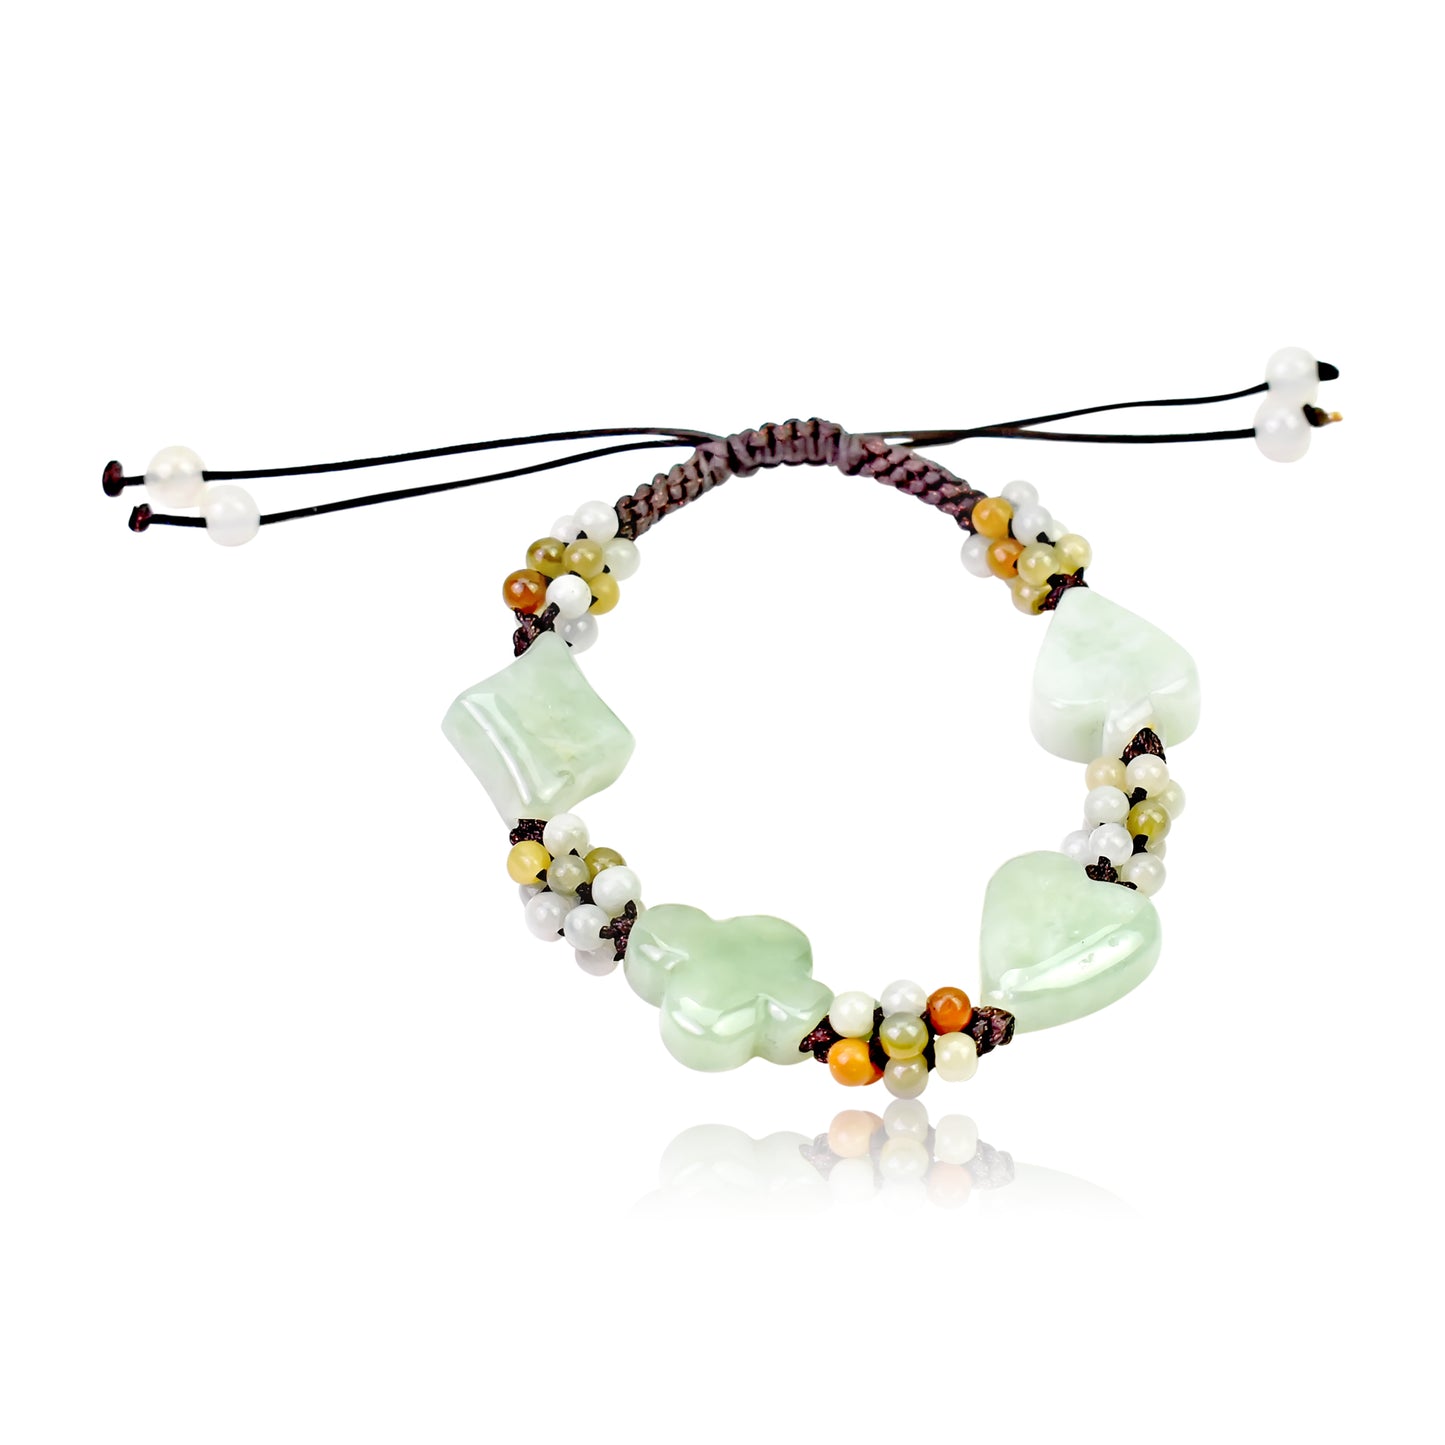 Make a Edgy Statement with this Card Deck Handmade Jade Bracelet